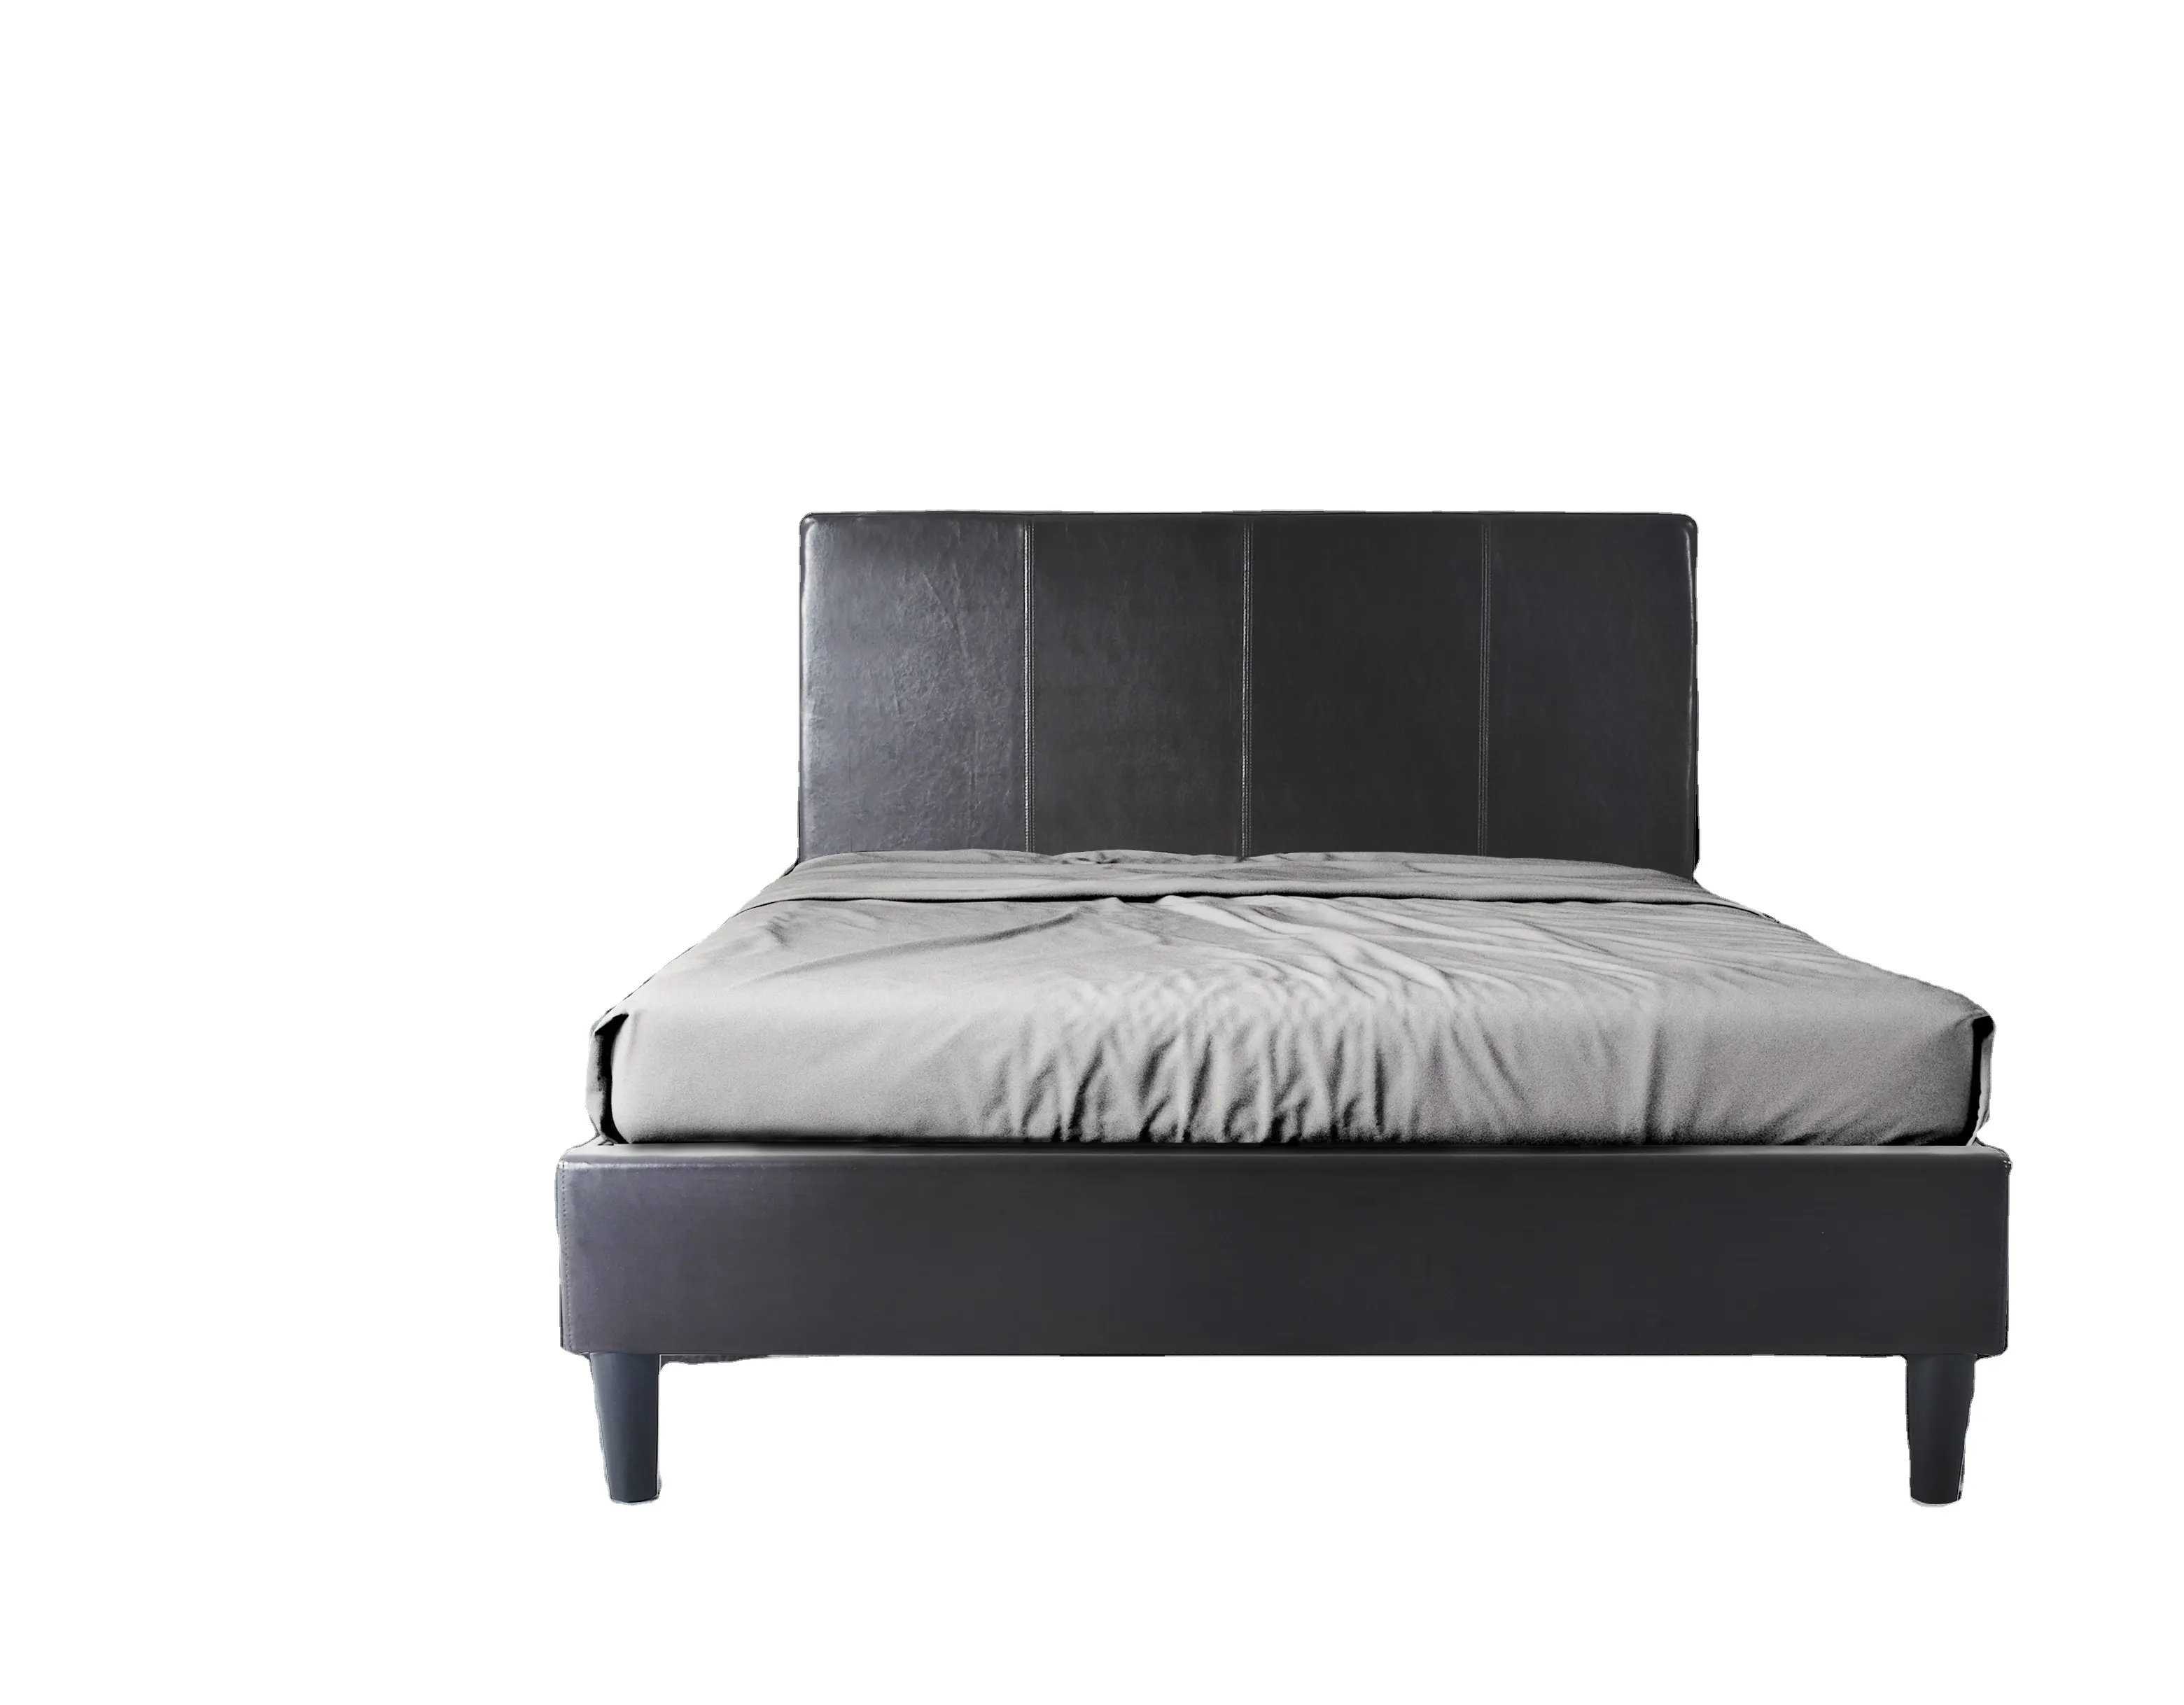 Nisco High Quantity Manufacturer strong and study Environmental friendly Bed Frame